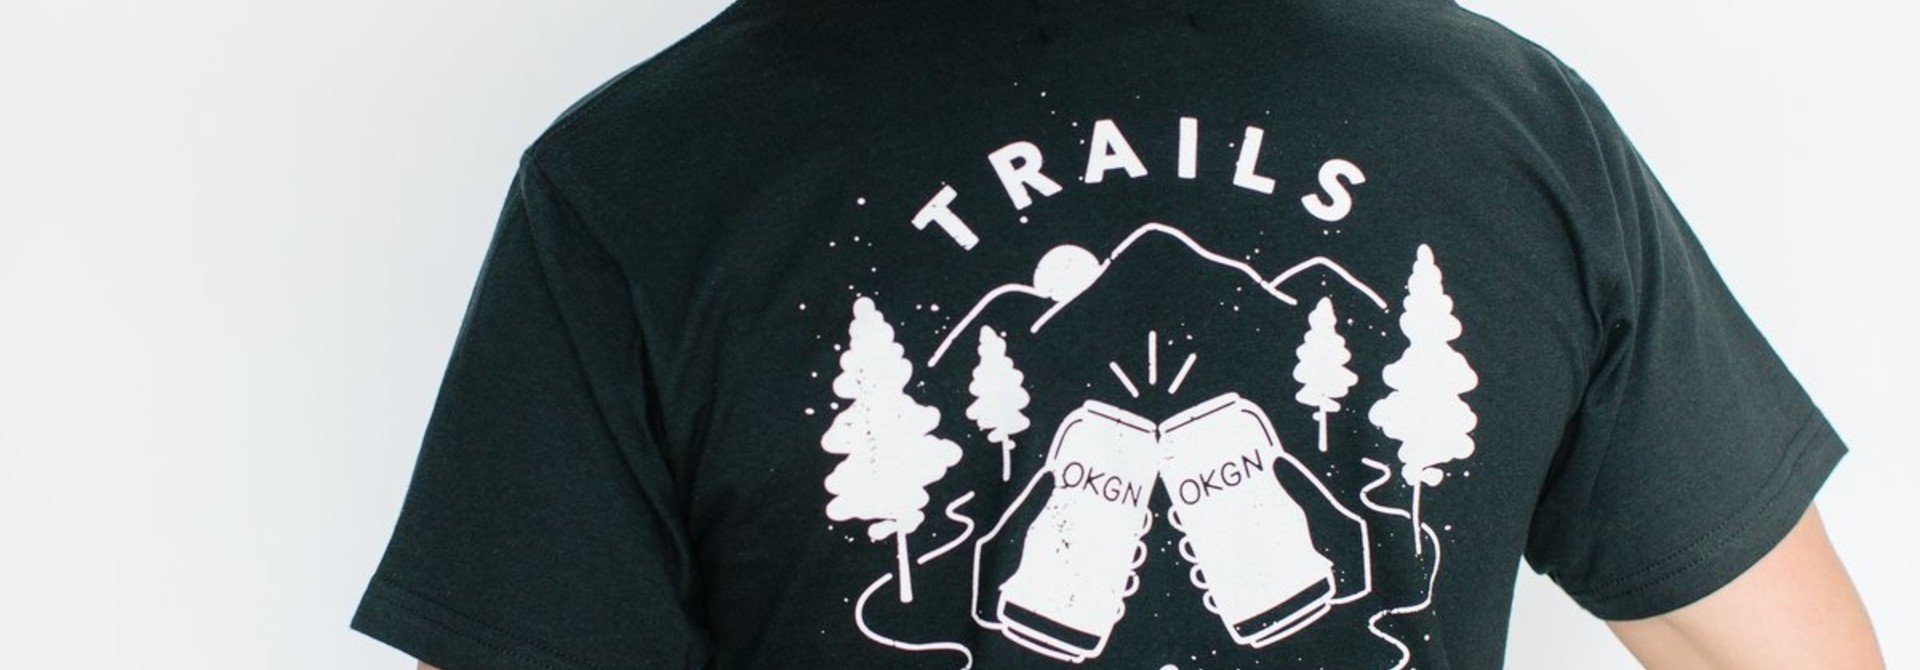 TRAILS AND ALES VINTAGE TEE